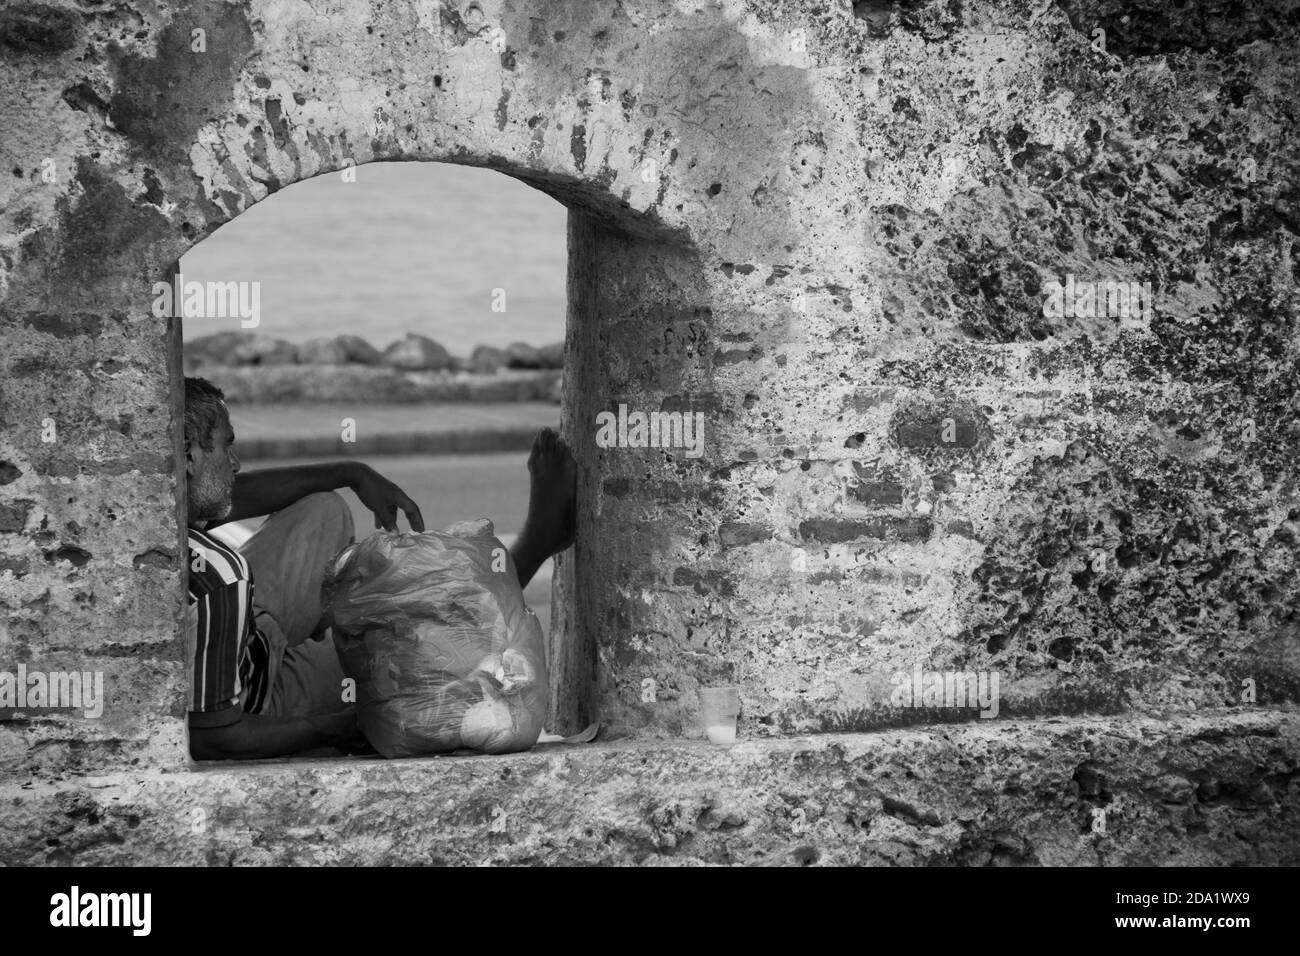 A homeless man seeks shelter in the ruined ramparts of Cartagena de Indias, Colombia Stock Photo